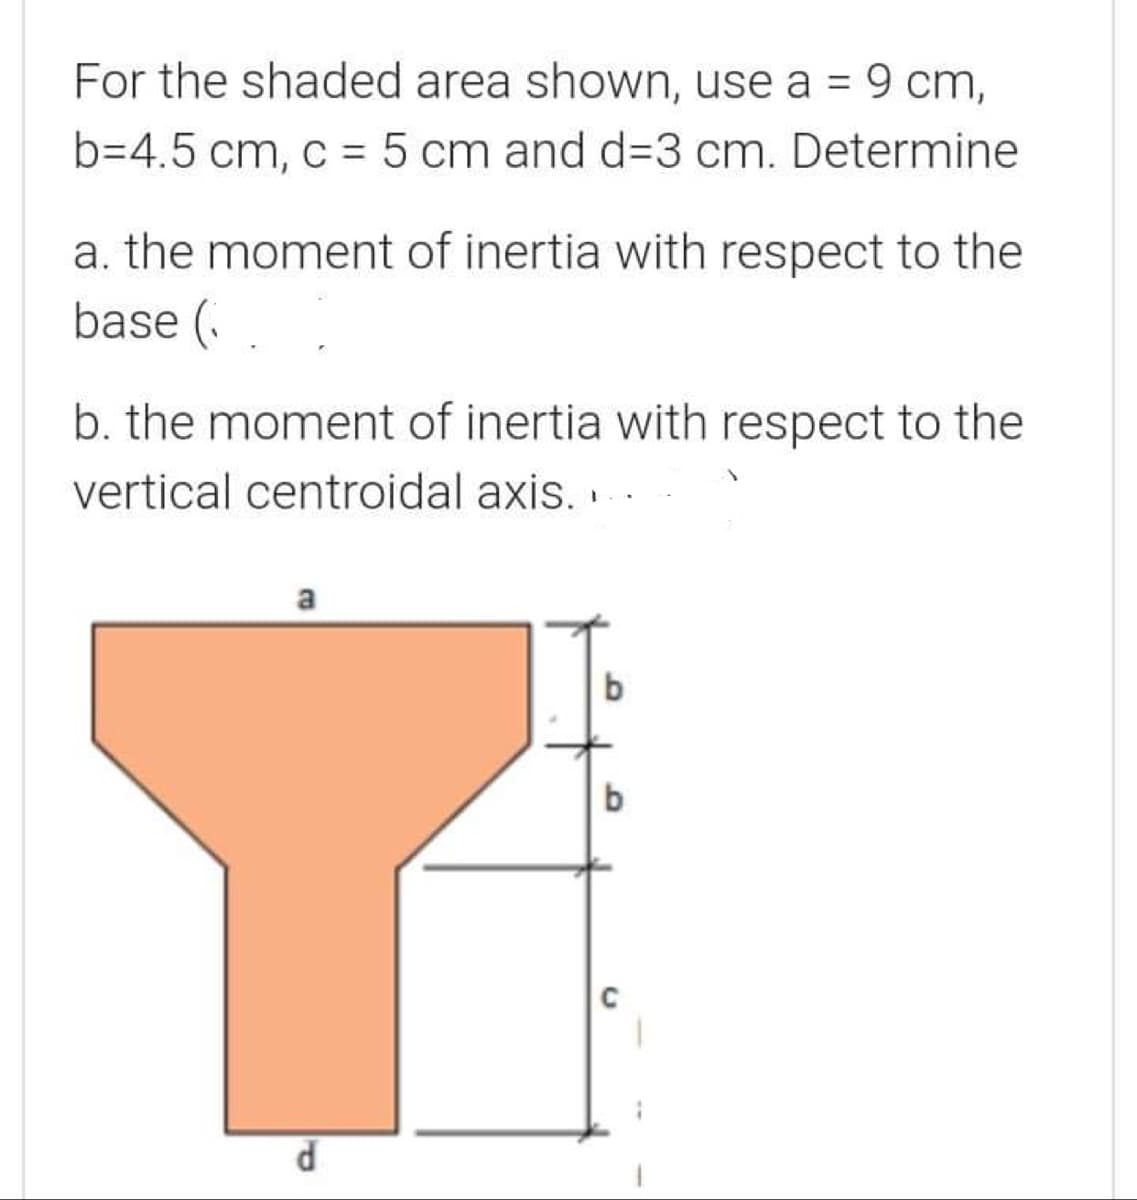 For the shaded area shown, use a = 9 cm,
b=4.5 cm, c = 5 cm and d=3 cm. Determine
a. the moment of inertia with respect to the
base (.
b. the moment of inertia with respect to the
vertical centroidal axis.
a
